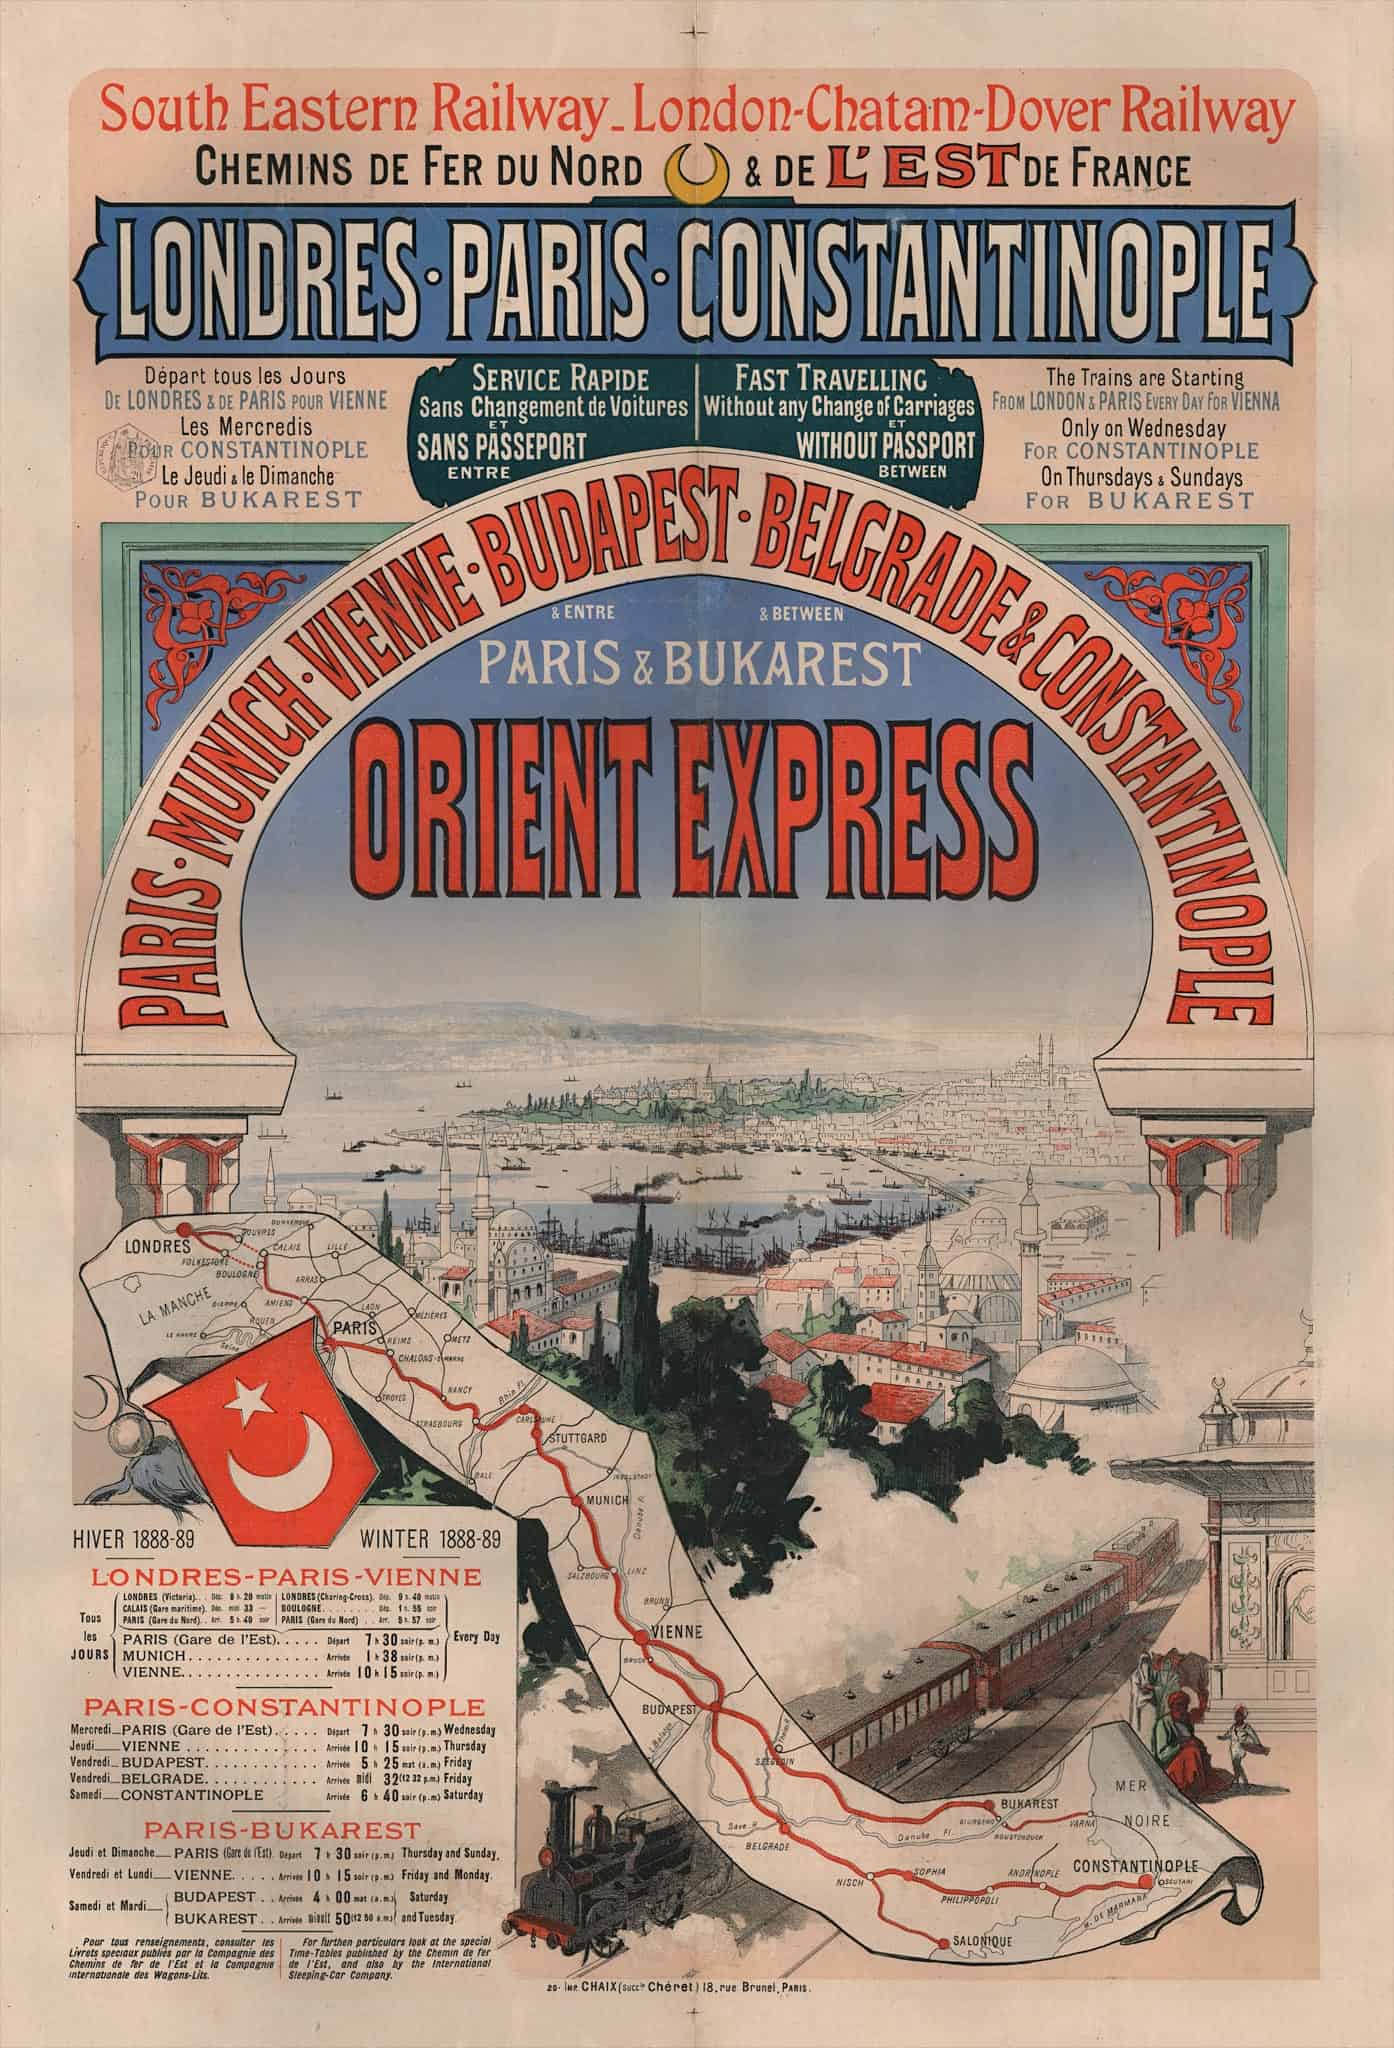 THE FAMOUS RAILROAD ERA – Poster for the Orient Express route – Paris- Constantinople